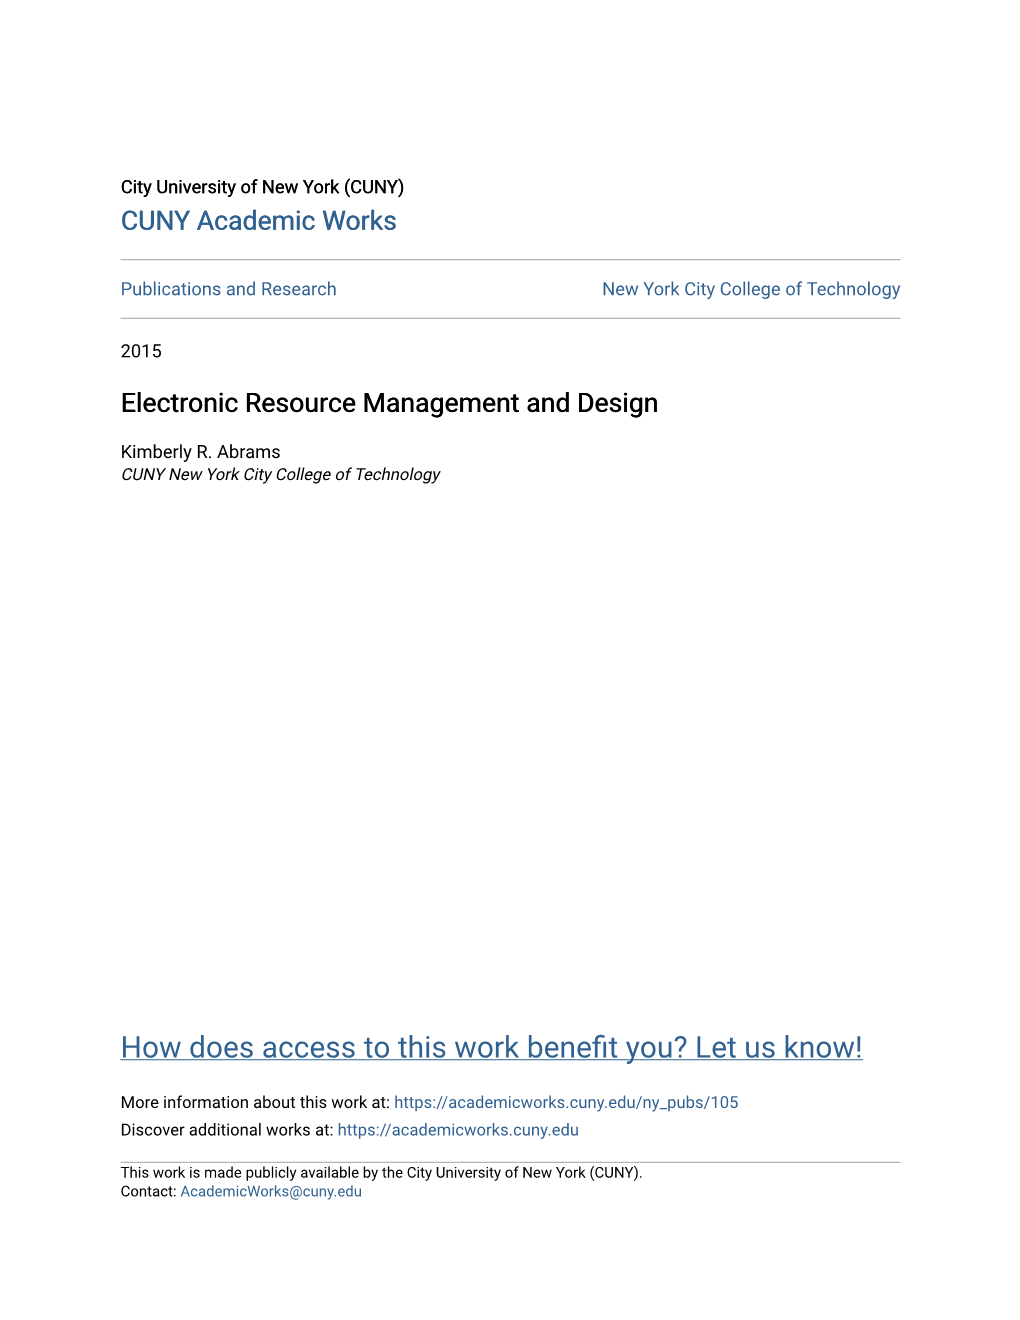 Electronic Resource Management and Design